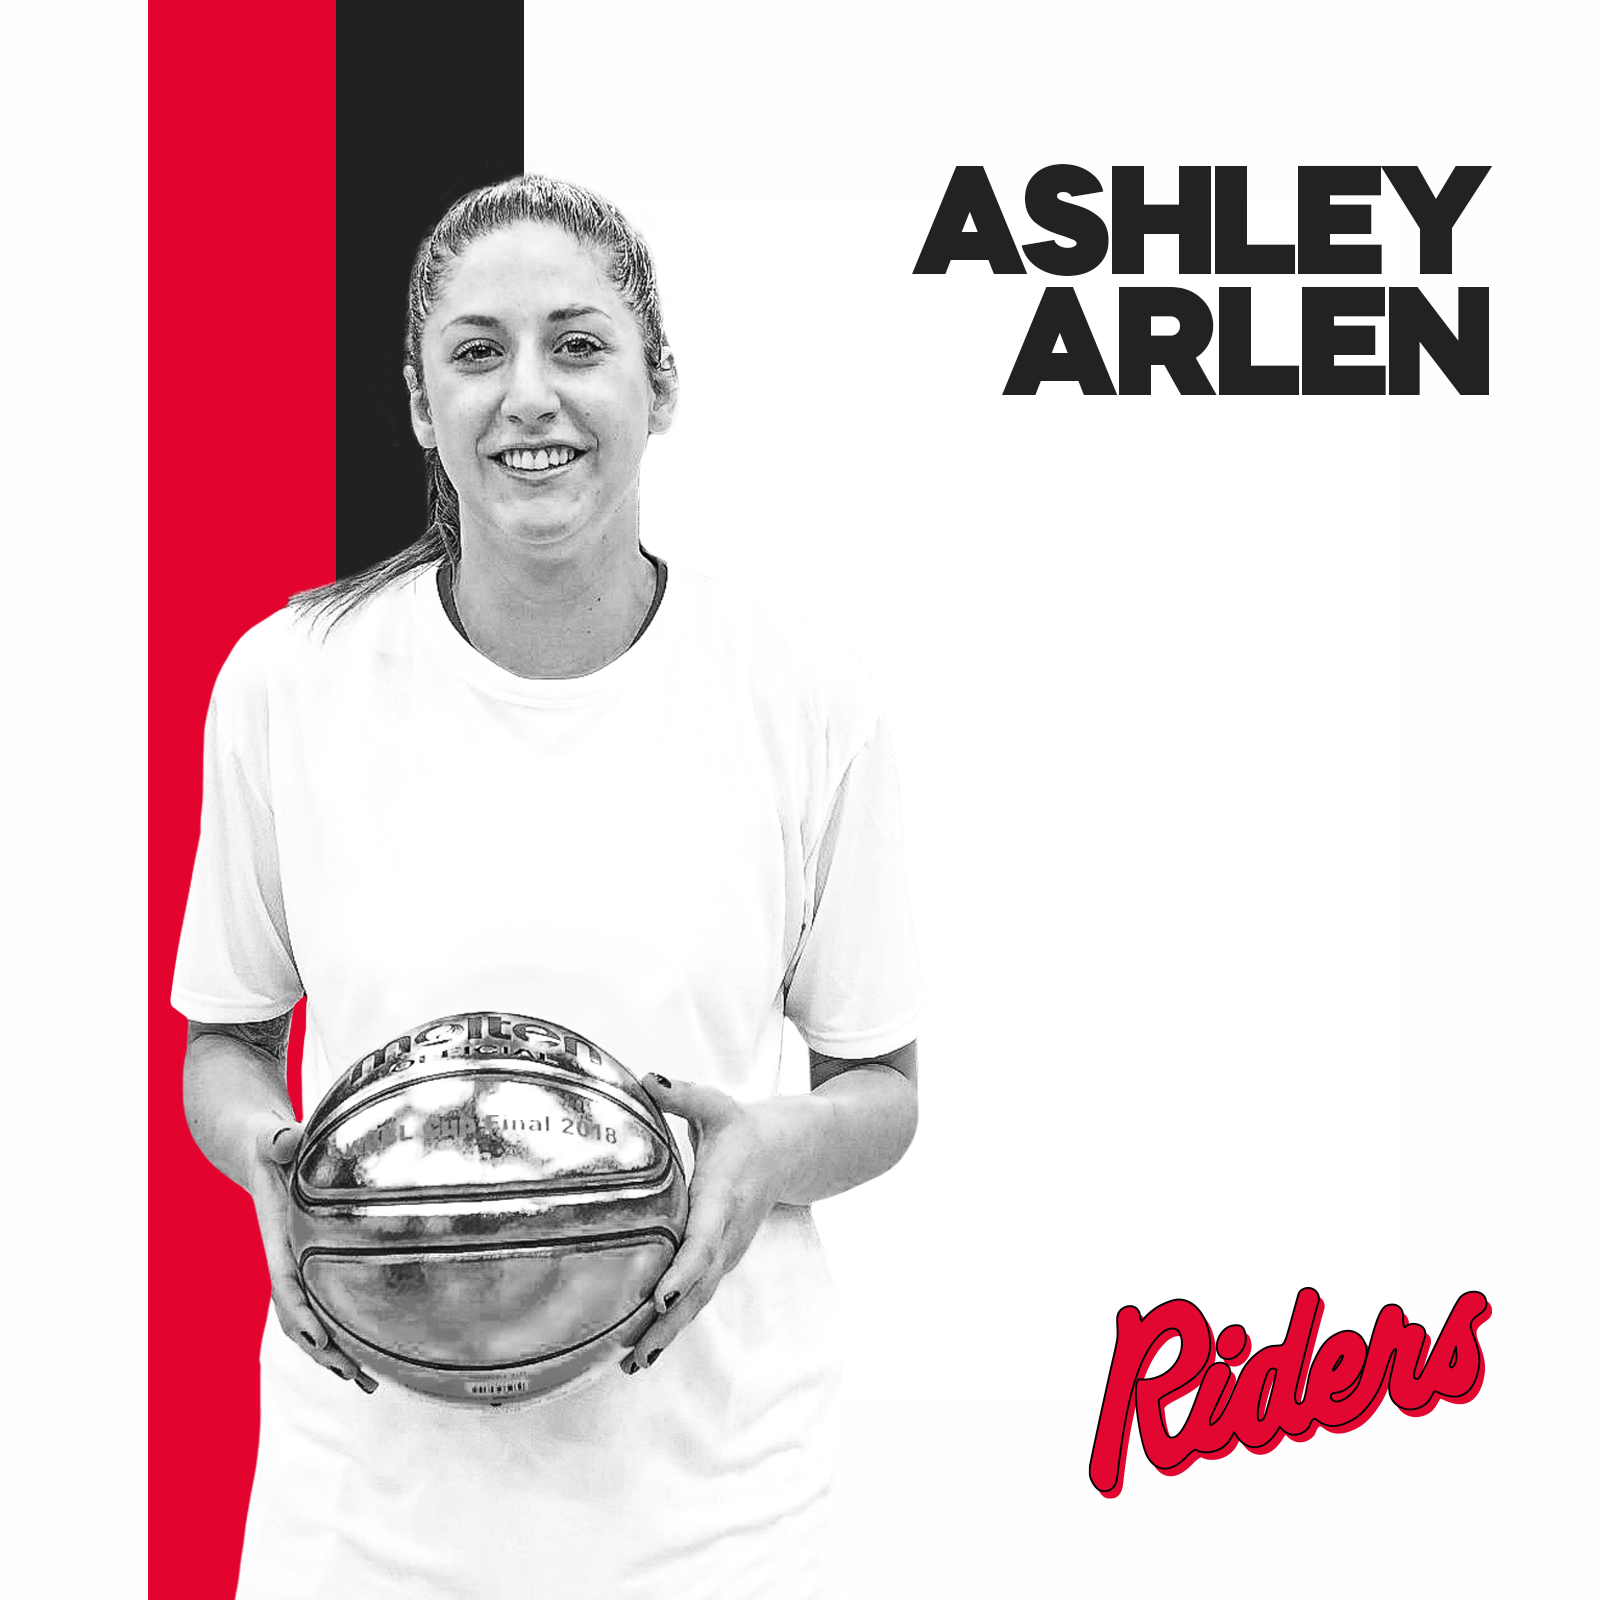 Arlen Returns to WBBL with Riders